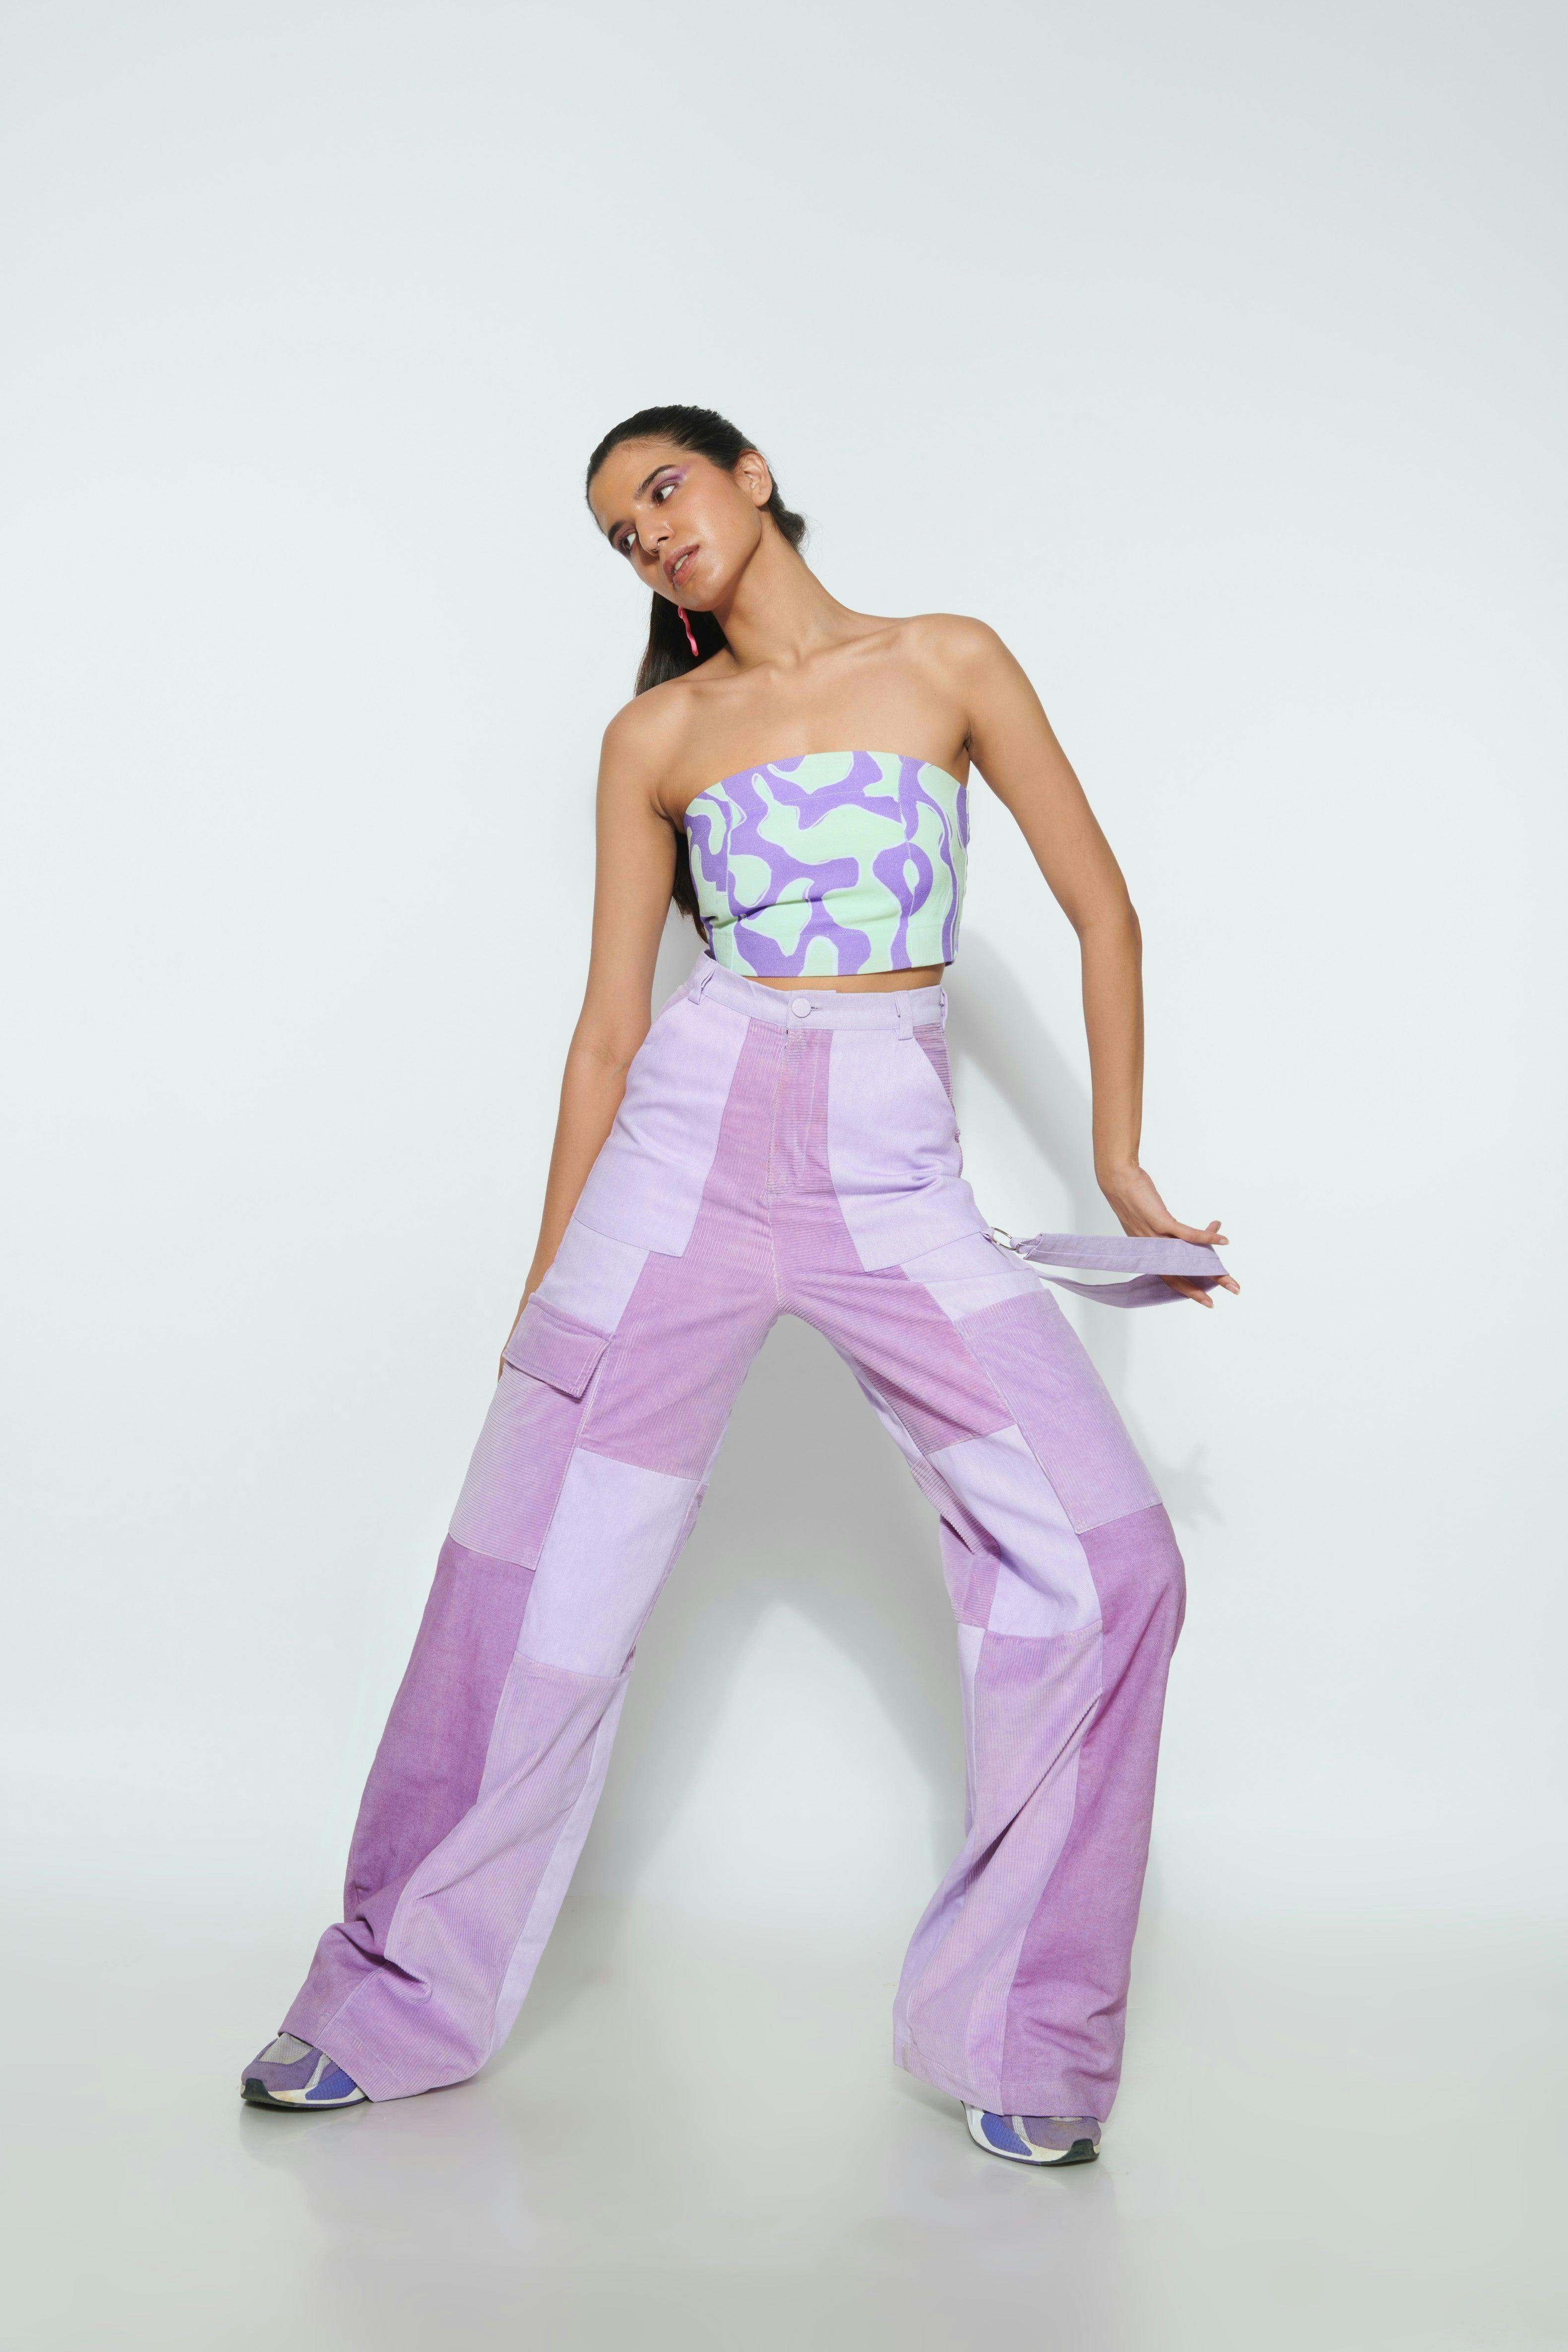 Thumbnail preview #4 for PURPLE SLIME CROP TOP AND GUMMY BEAR PANTS CO-ORD SET- FULL SET